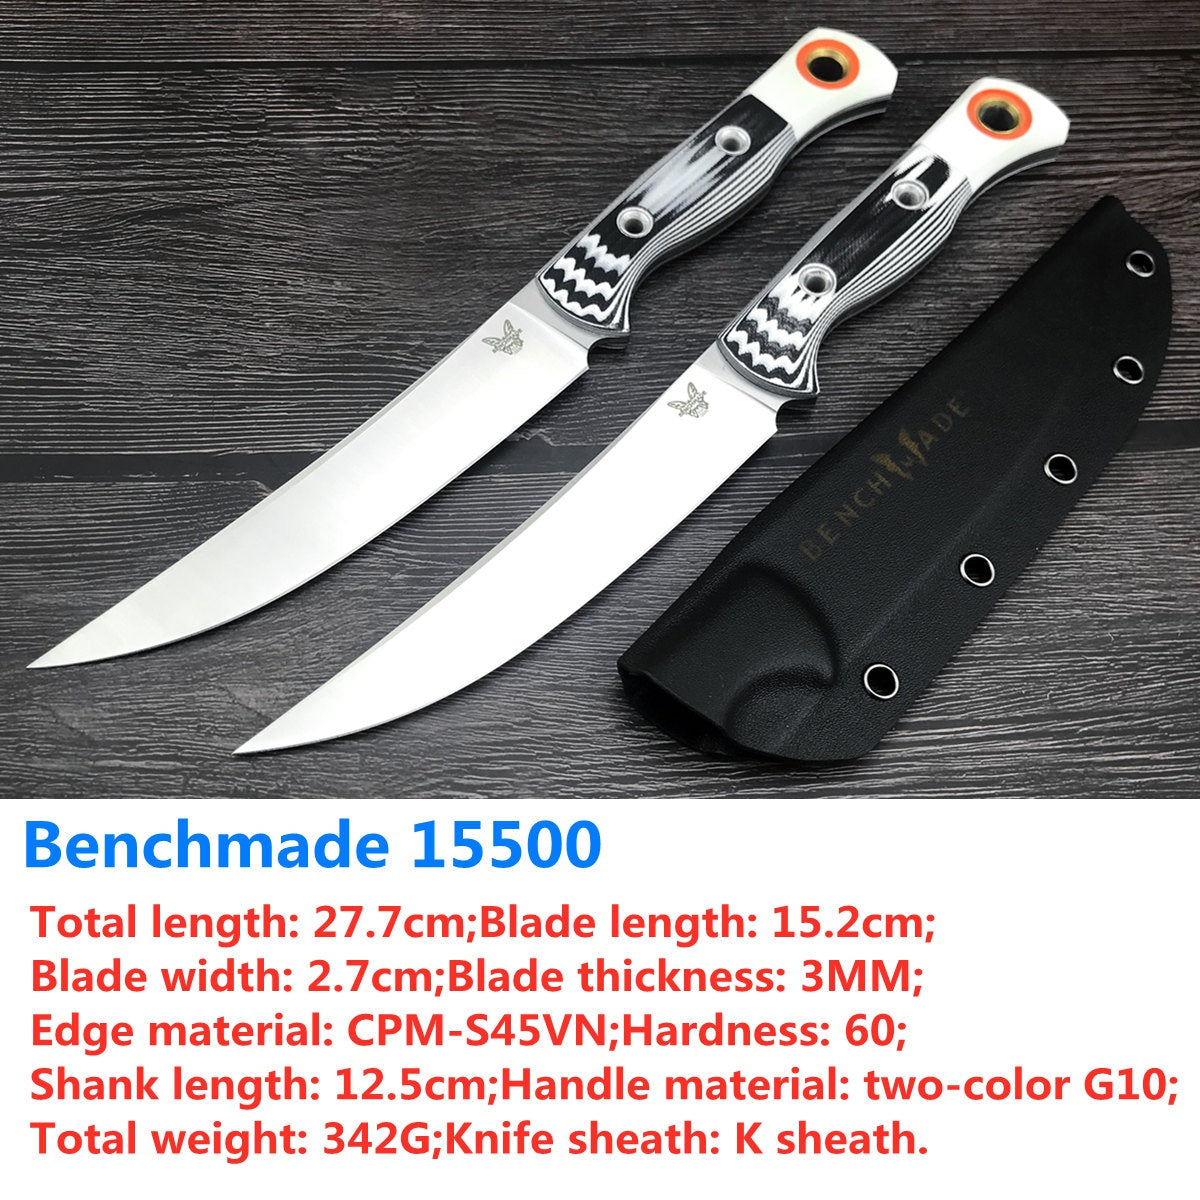 "New Benchmade Hunting Fixed Blade Knife Tactital Survival Straight Knives Outdoor Camping Self Defense Tool Combat Bowie Knife with Sheath"